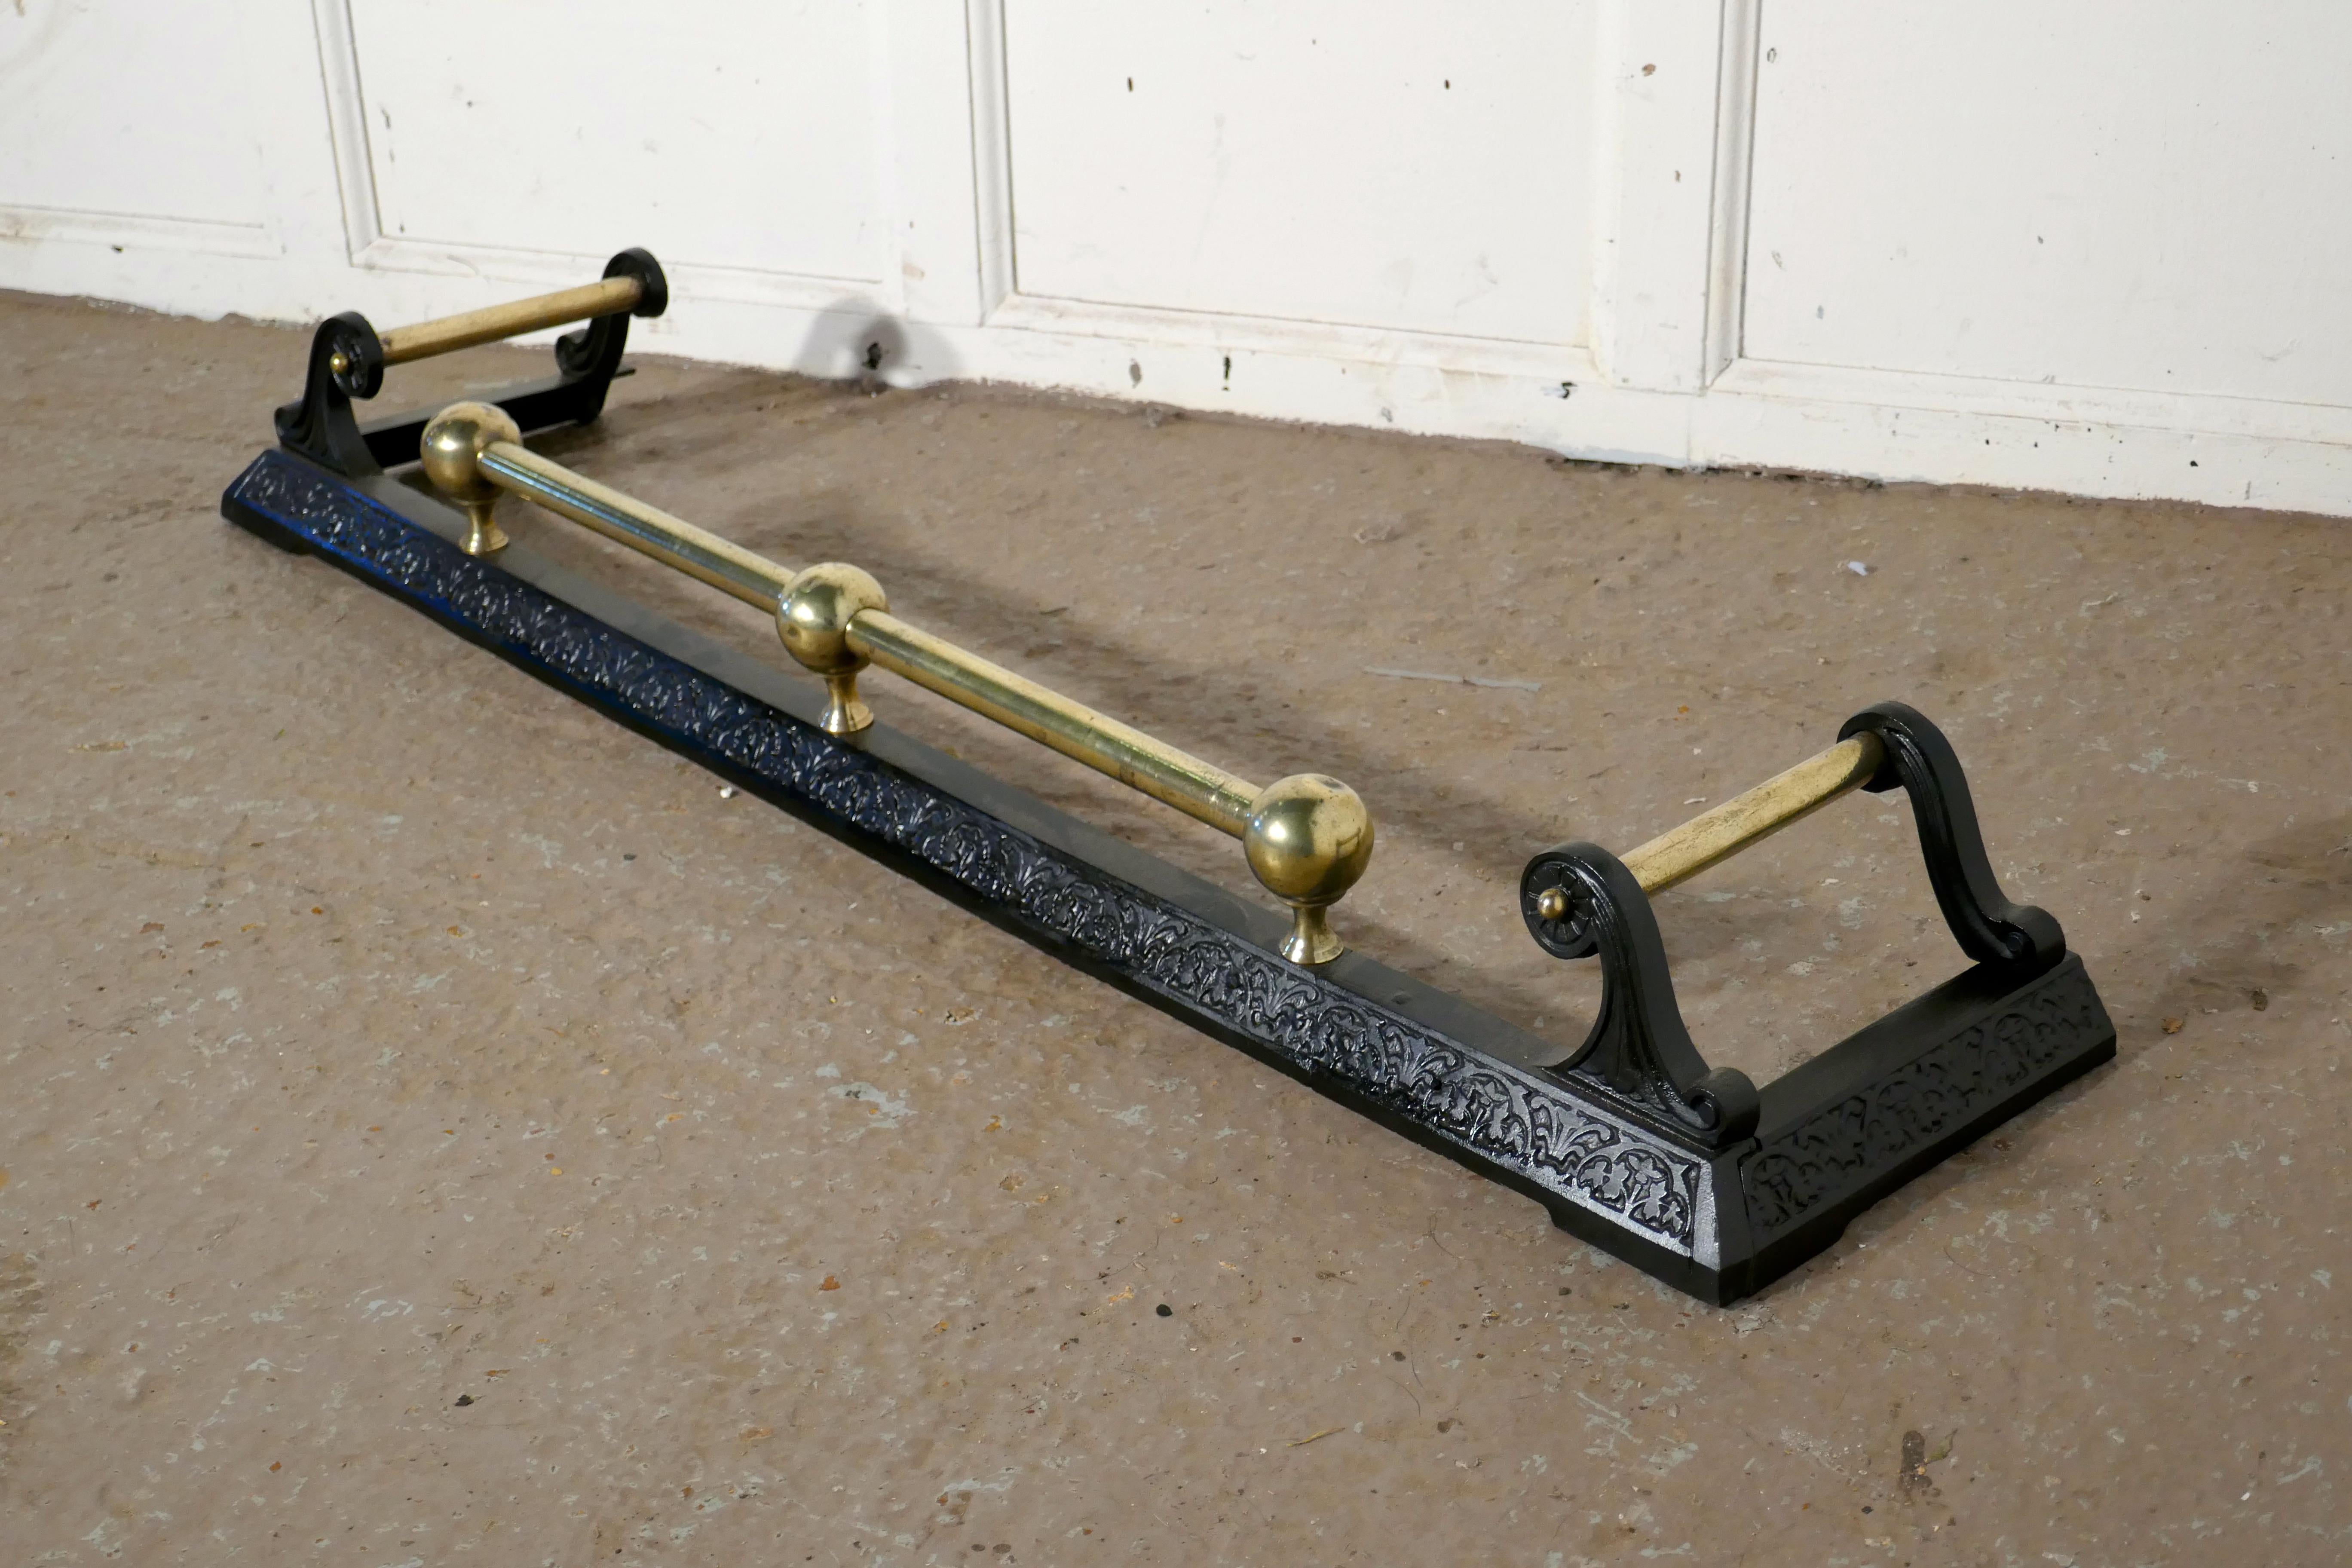 Victorian brass and iron fender

This is an attractive Victorian brass and iron fender it has decoration impressed on the iron base and the brass rail has chunky brass knobs supporting it
The fender is in very good condition it is 5” high, and